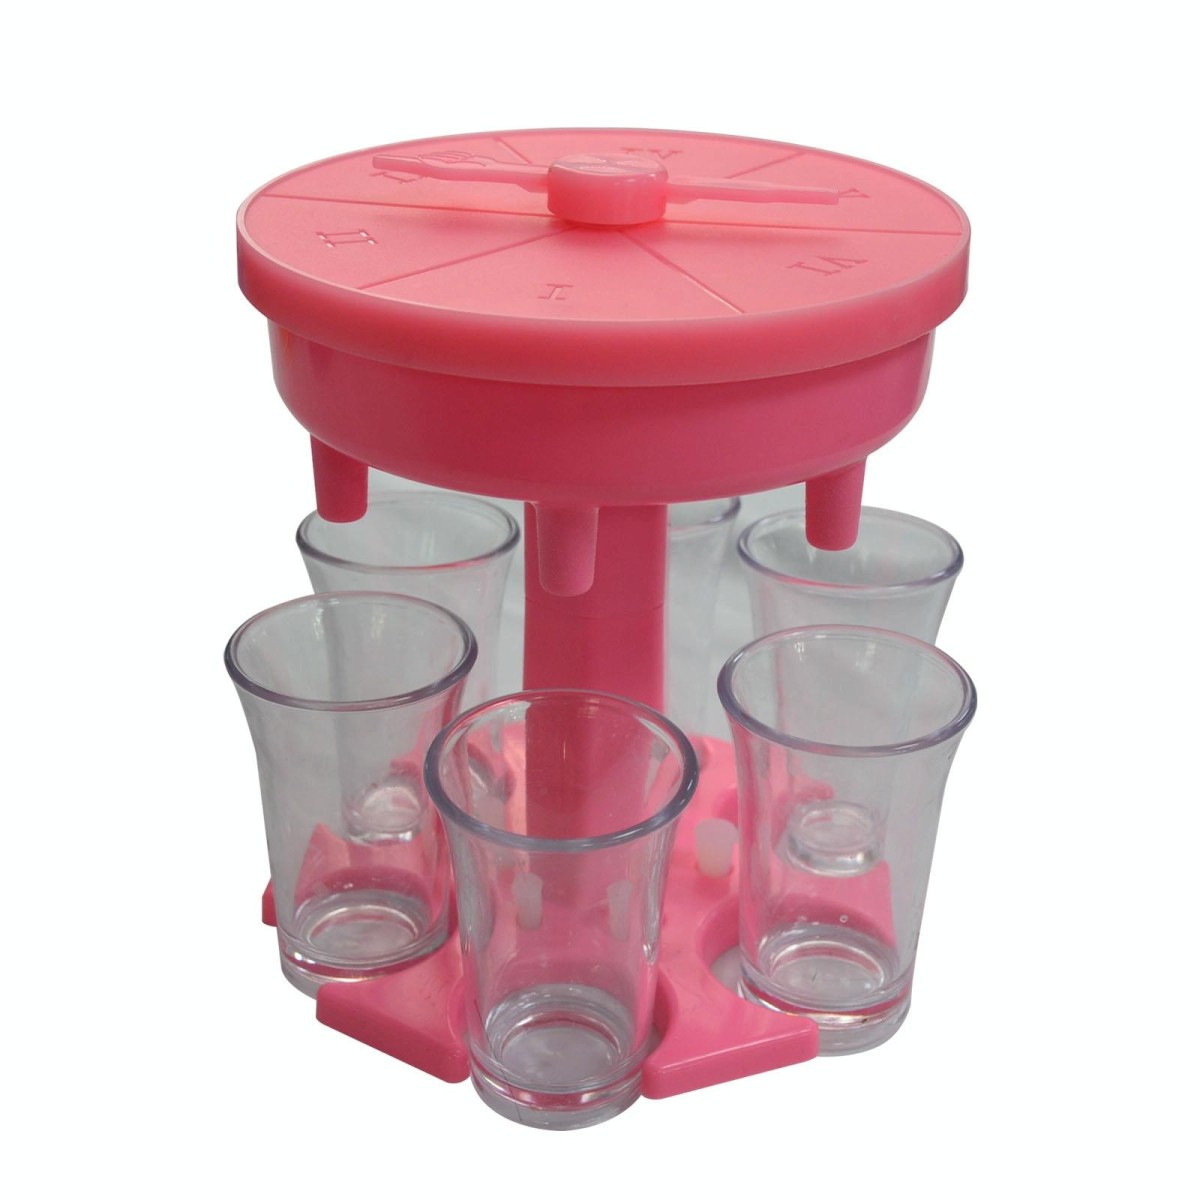 6 Cups Wine Dispenser Automatic Diversion Wine Pourer With Game Turntable, Style: Round Pink with Transparent Cup